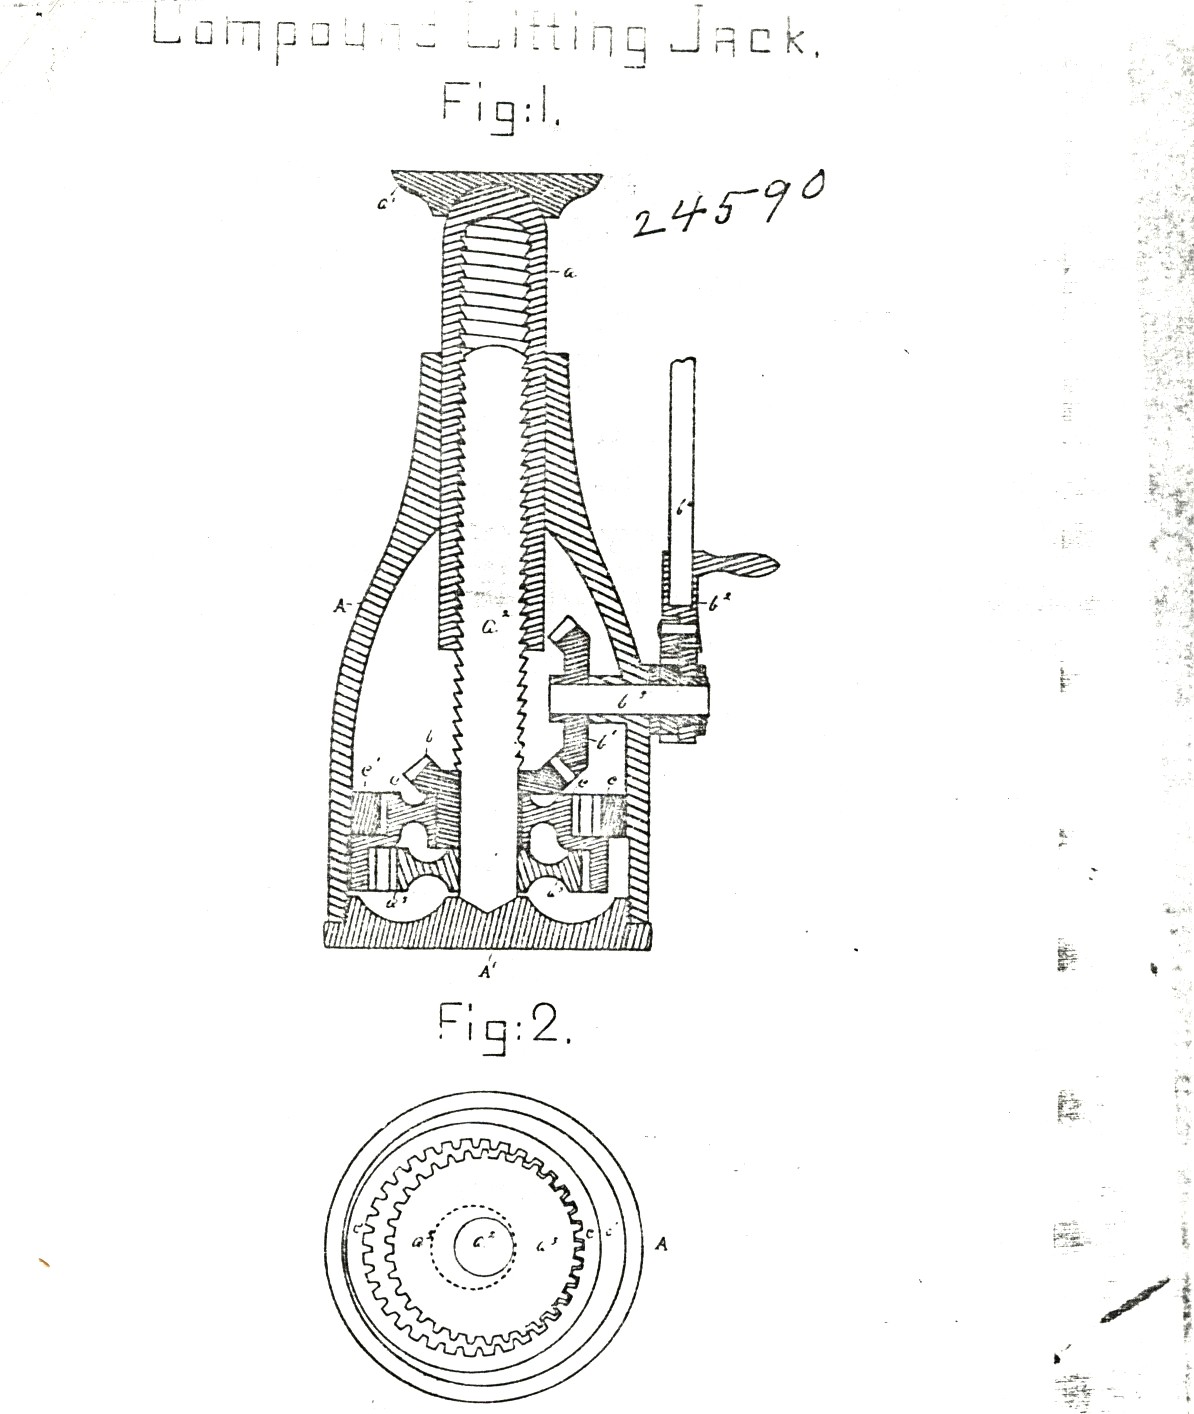 Black and white image of the technical drawing of a tool, labeled "Compound Lifting Jack". There are two drawings: Figure 1 gives a general outline of the tool's operation, while Figure 2 demonstrates its gear system within a series of circles.